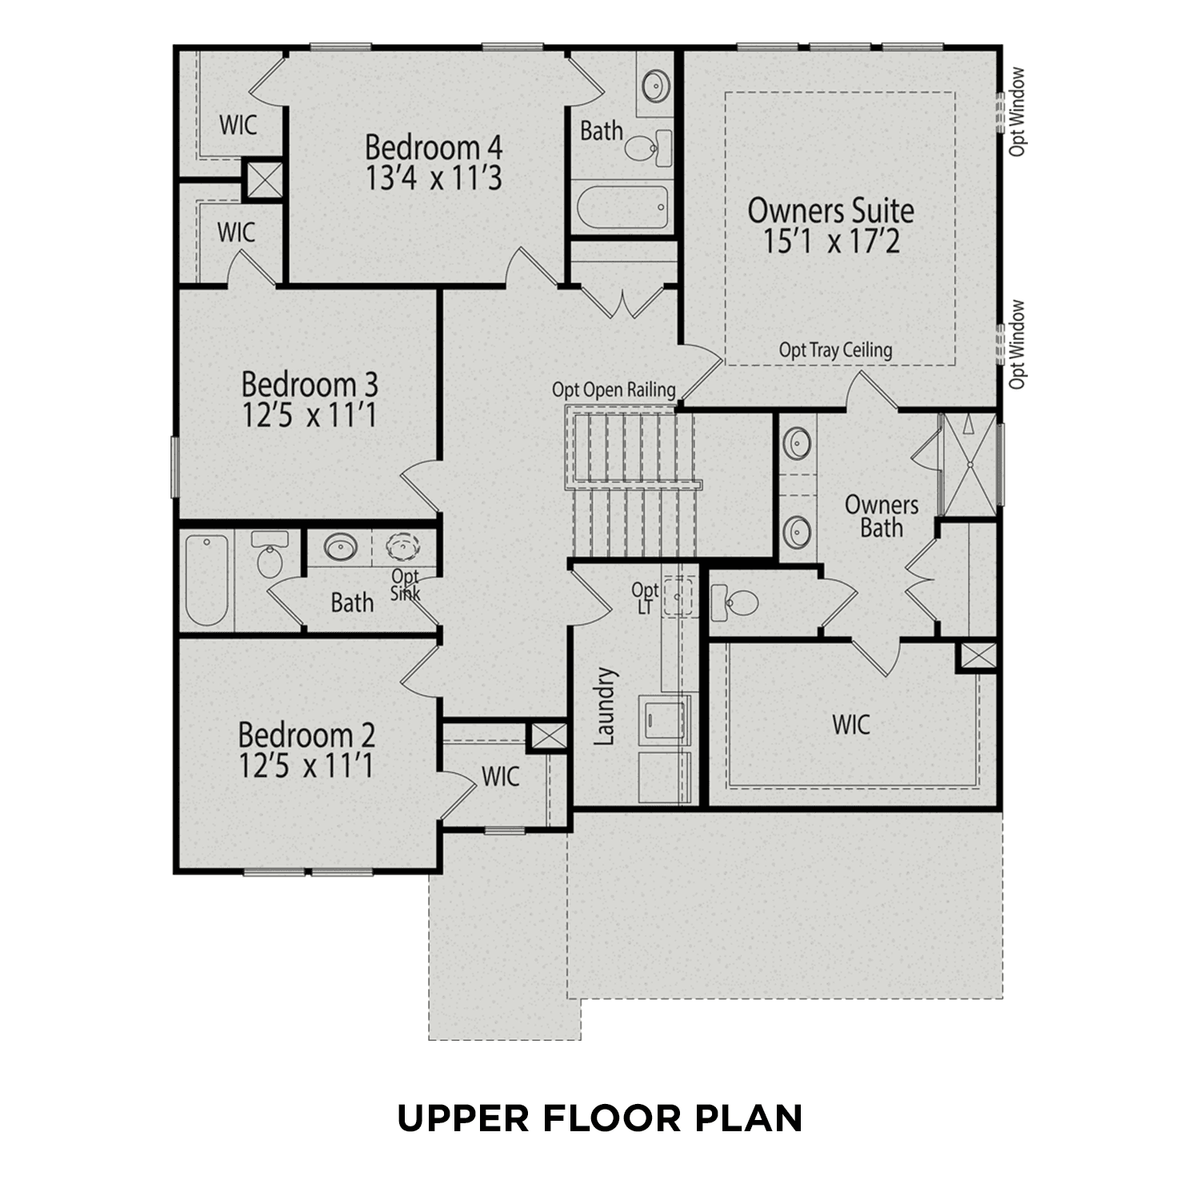 2 - The Hickory E floor plan layout for 632 Marion Hills Way in Davidson Homes' Glenmere community.